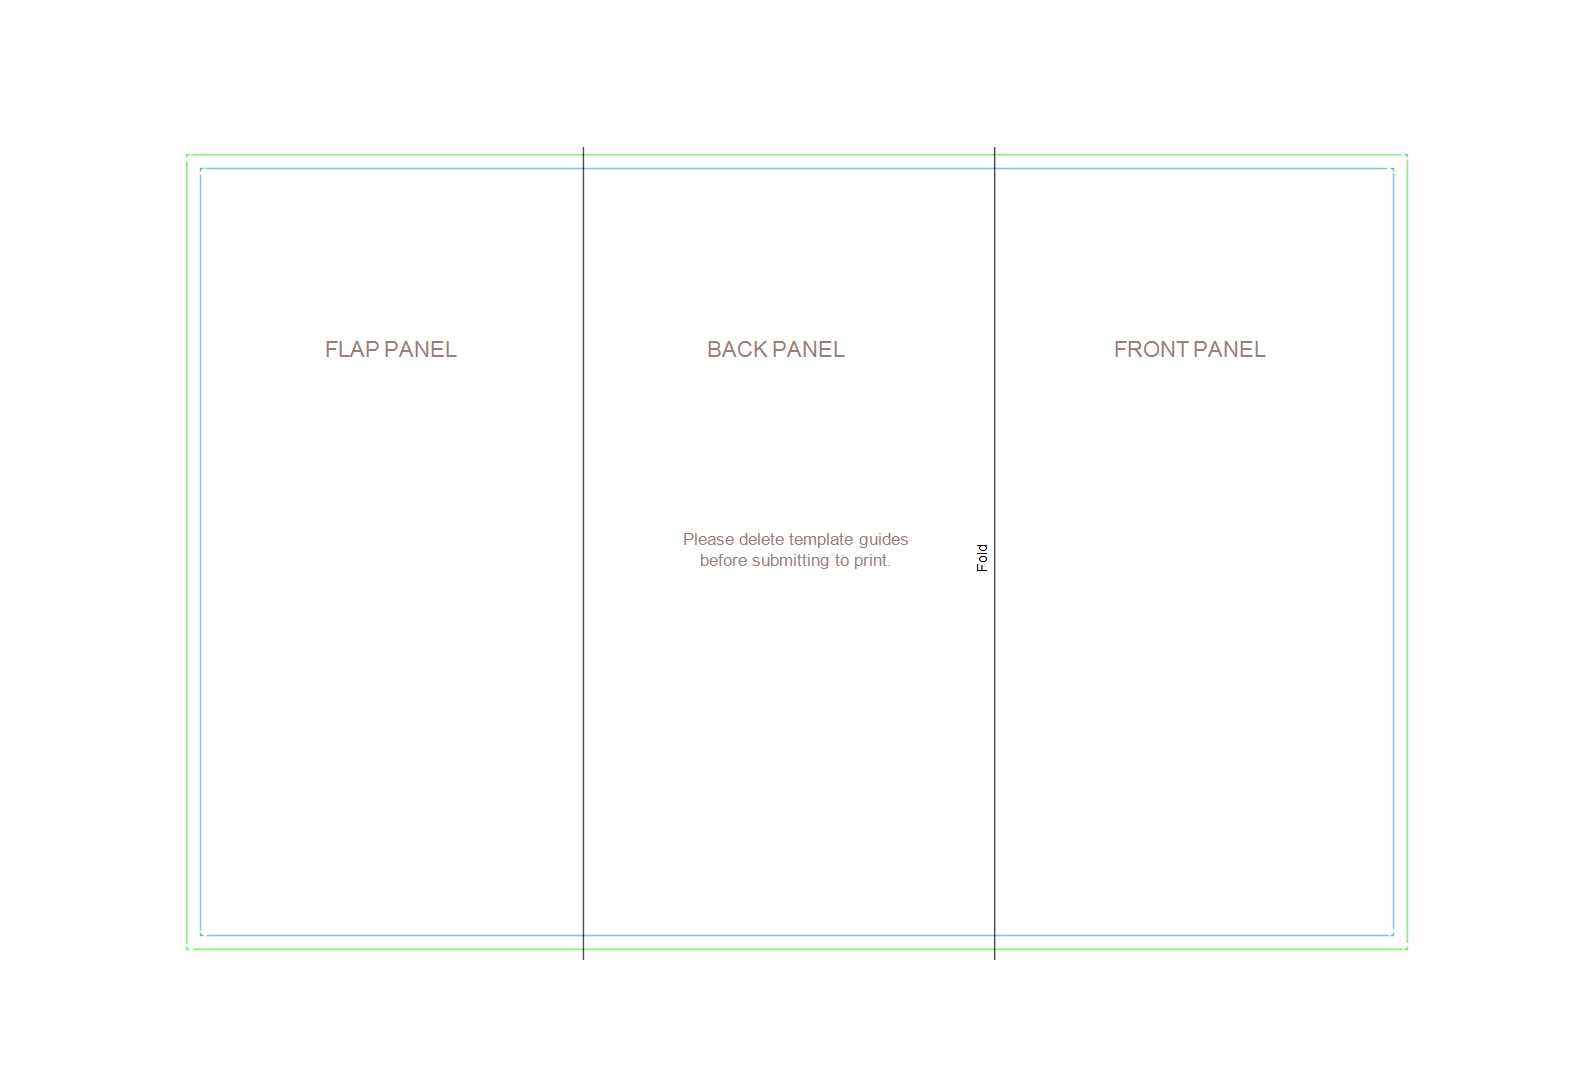 Pamphlet Template Docs – Dalep.midnightpig.co Intended For Google Drive Templates Brochure